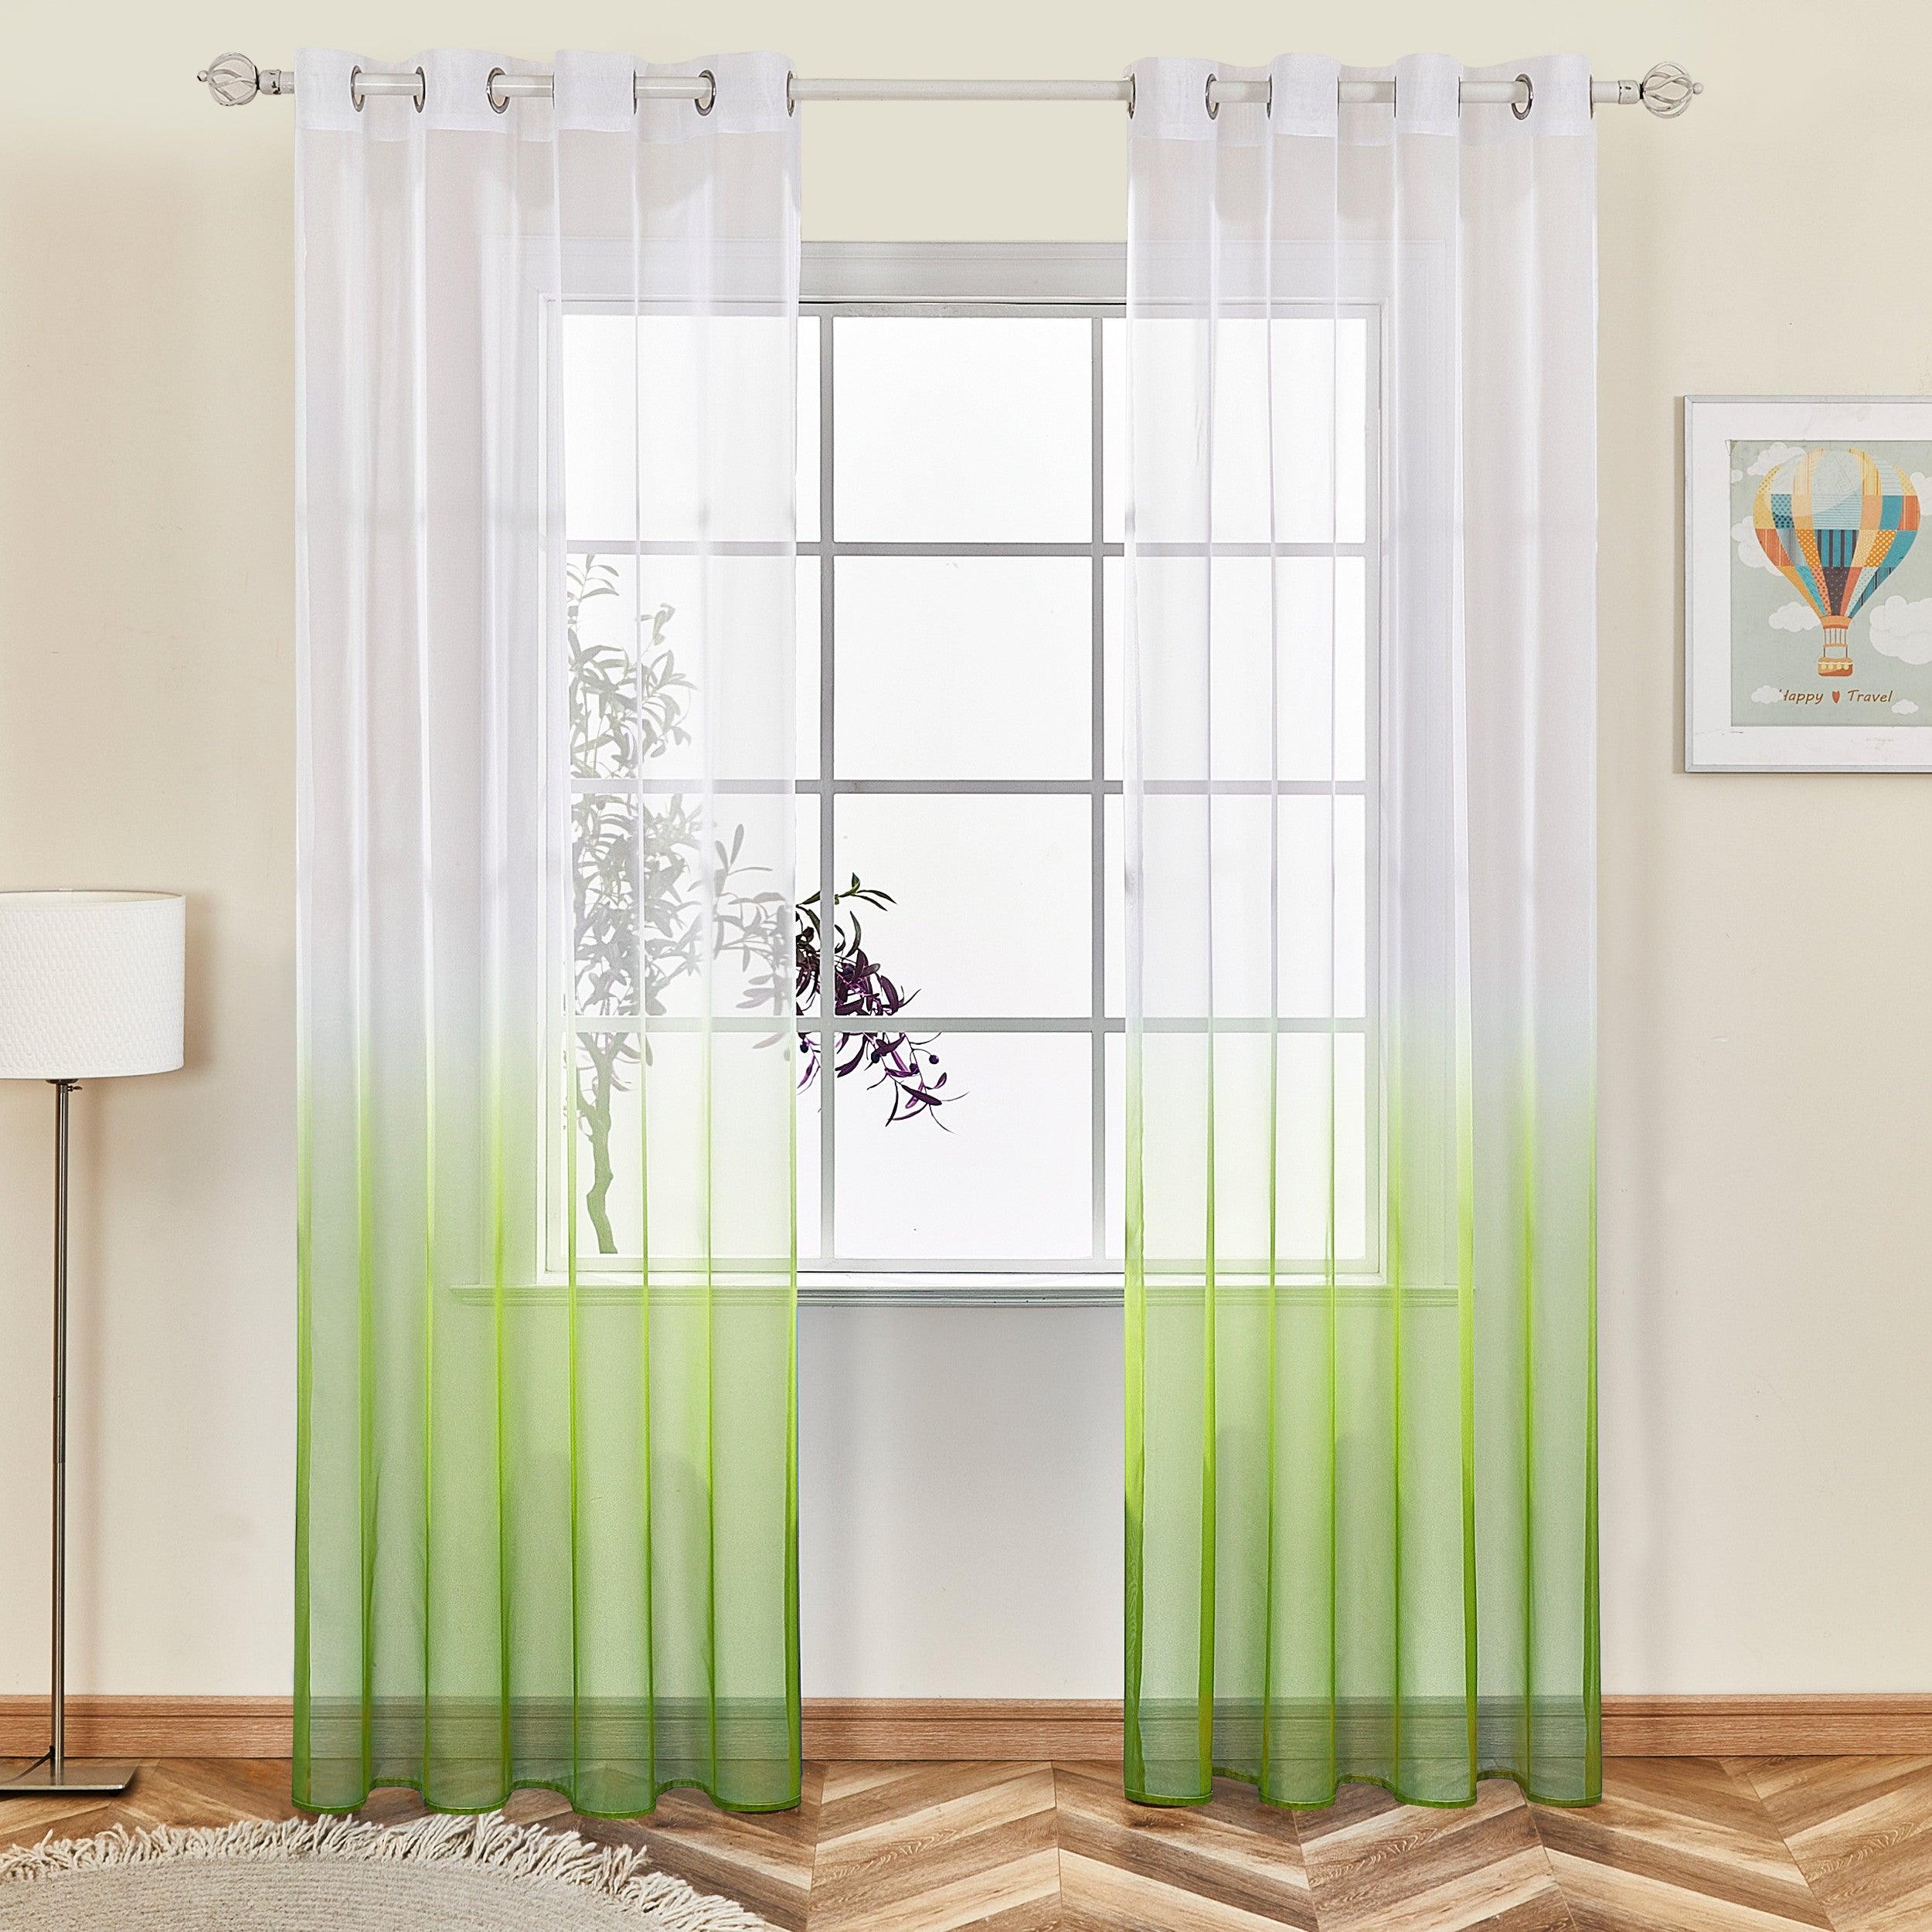 Modern Curtain Designs- Ombre White Sheer Curtain Outdoor Suit For Party, Wedding Backdrops,Bedroom,1 Panel - Topfinel